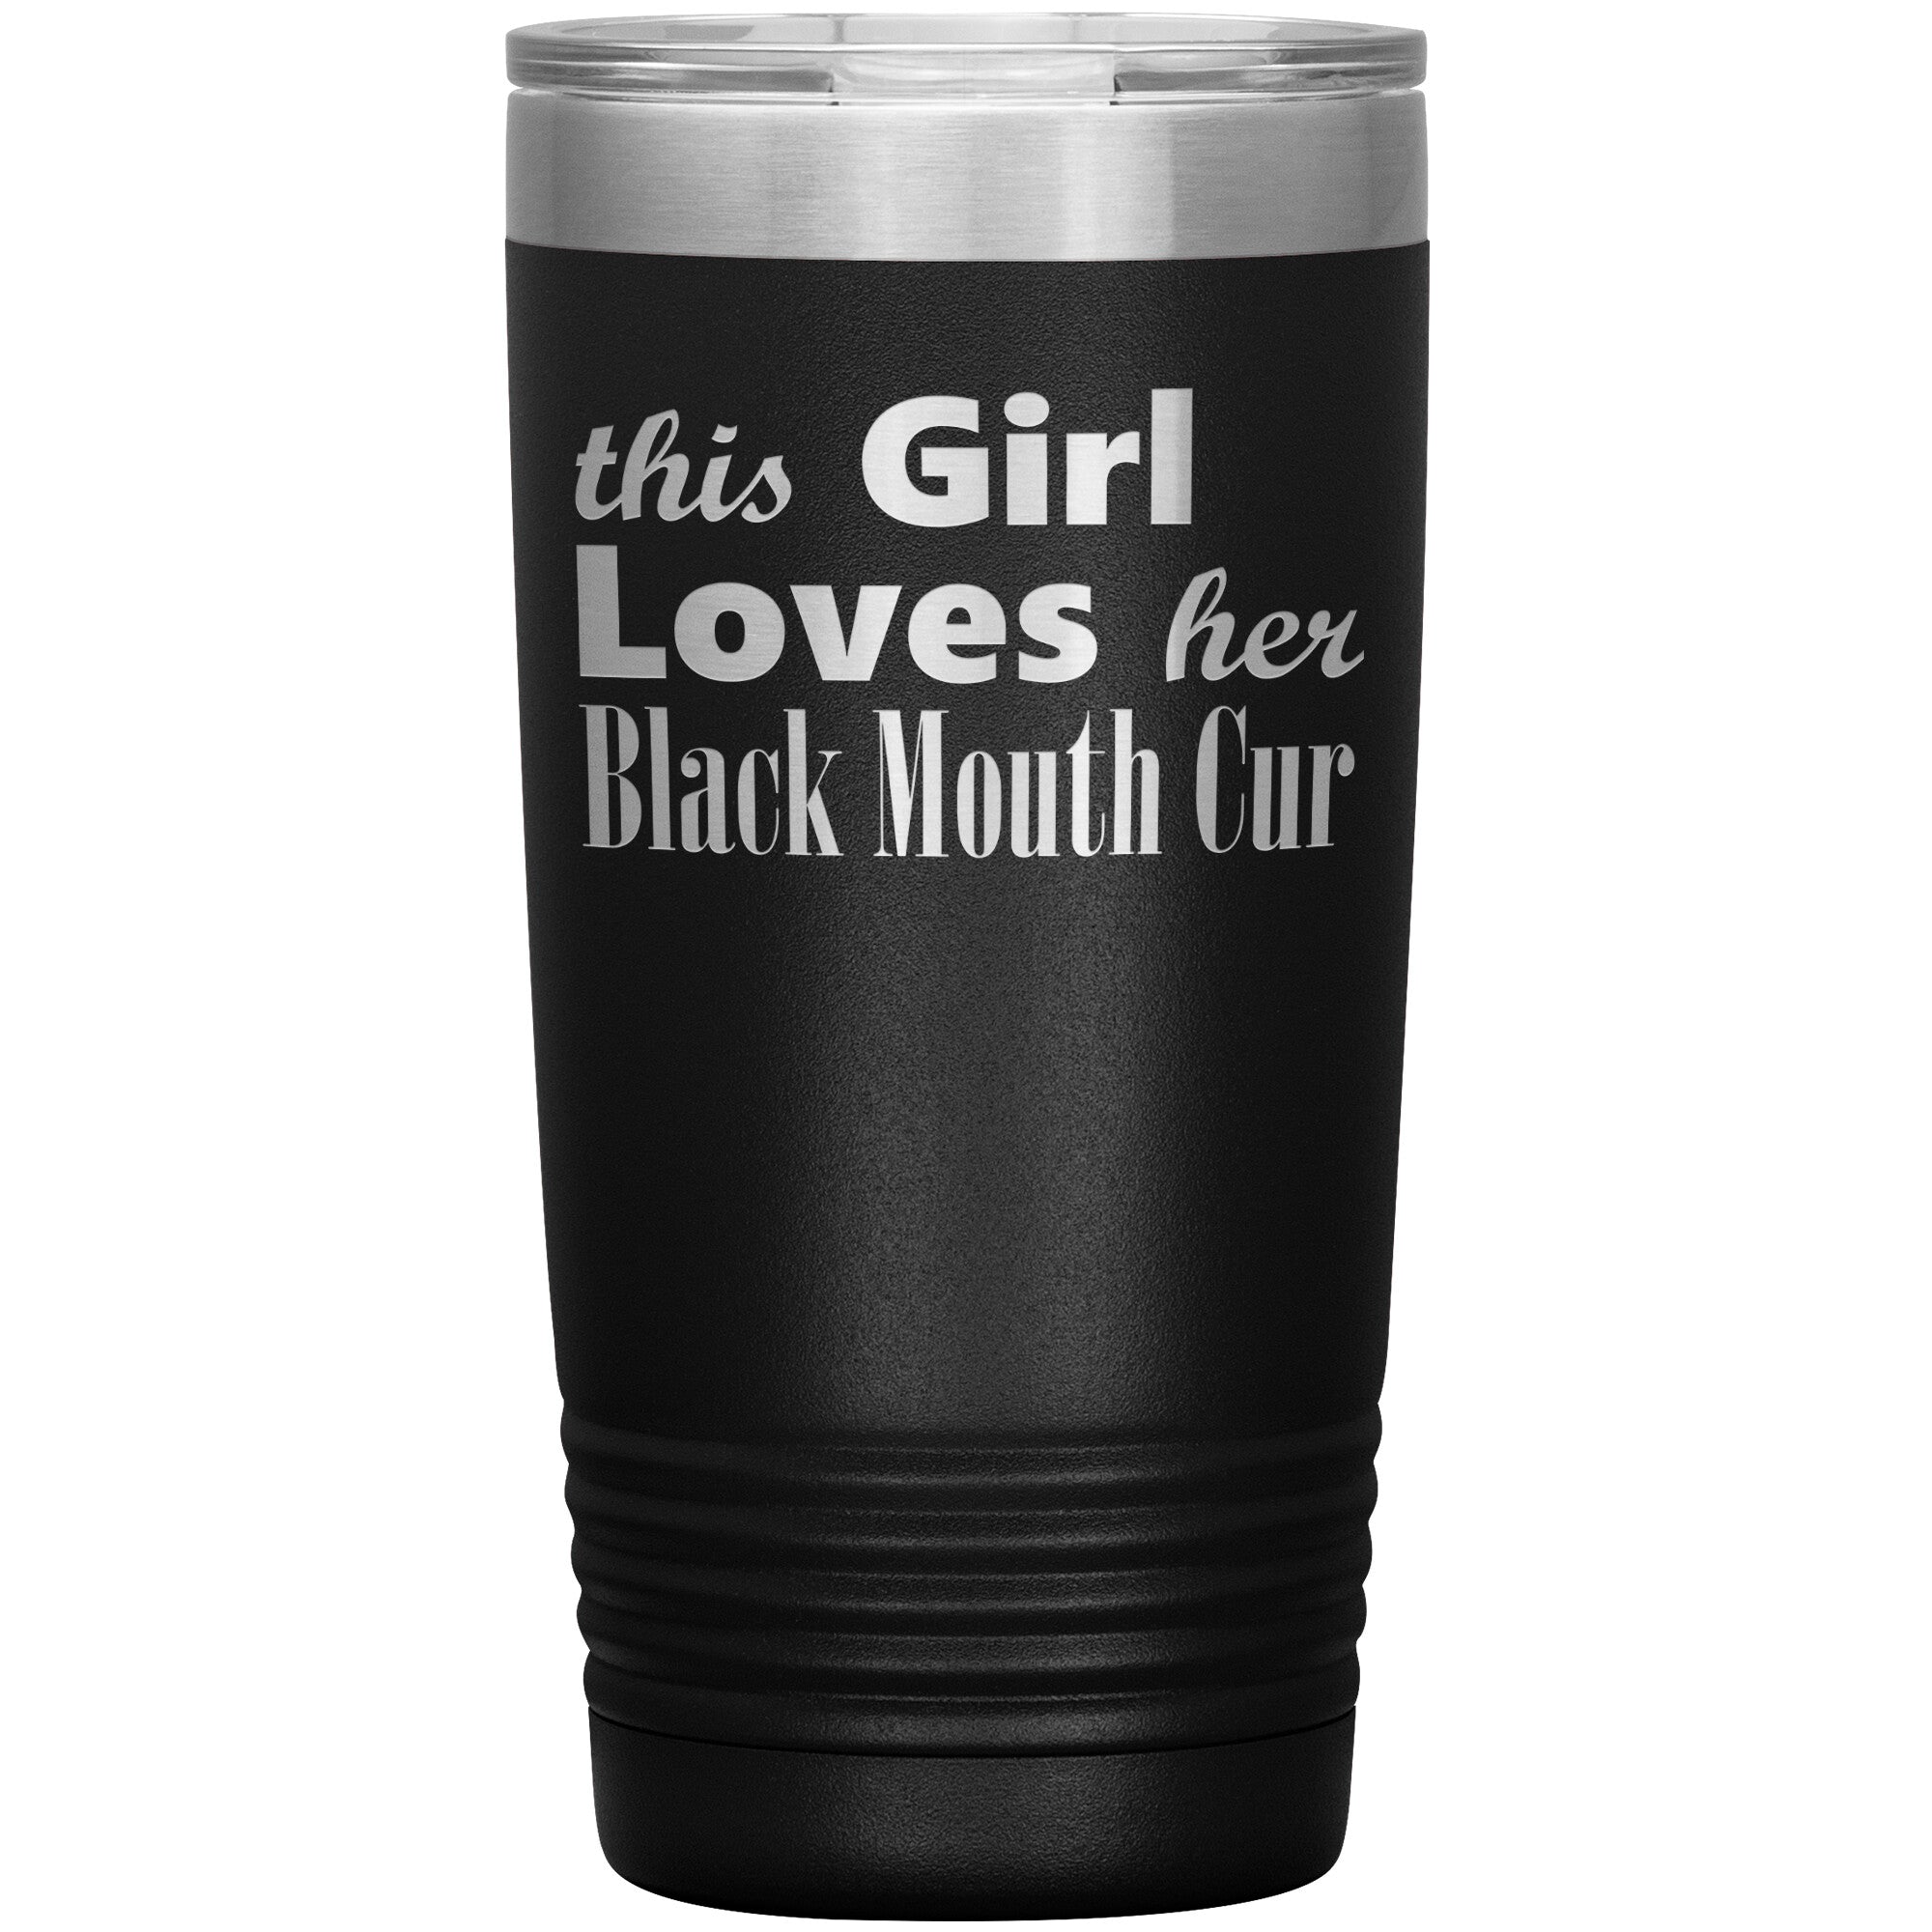 Black Mouth Cur - 20oz Insulated Tumbler